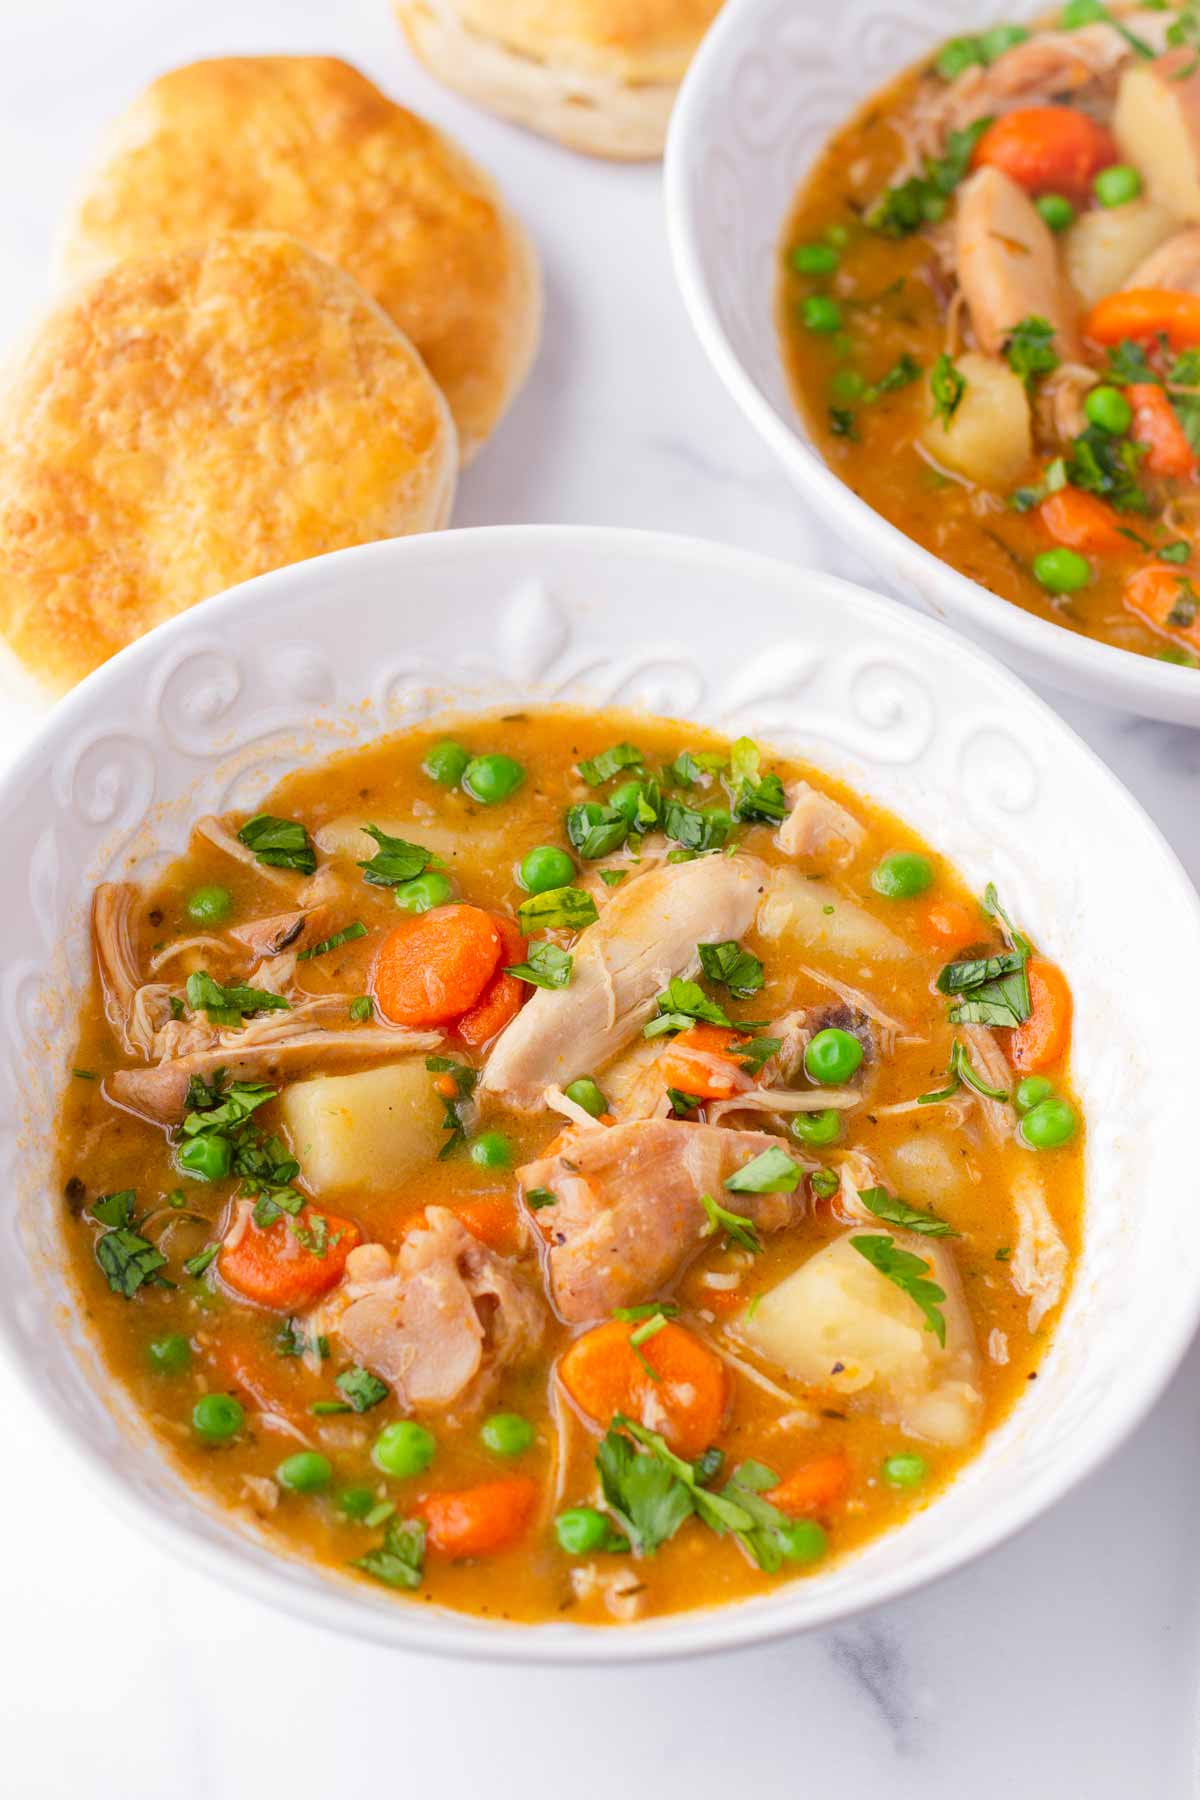 chicken stew in bowls with biscuits